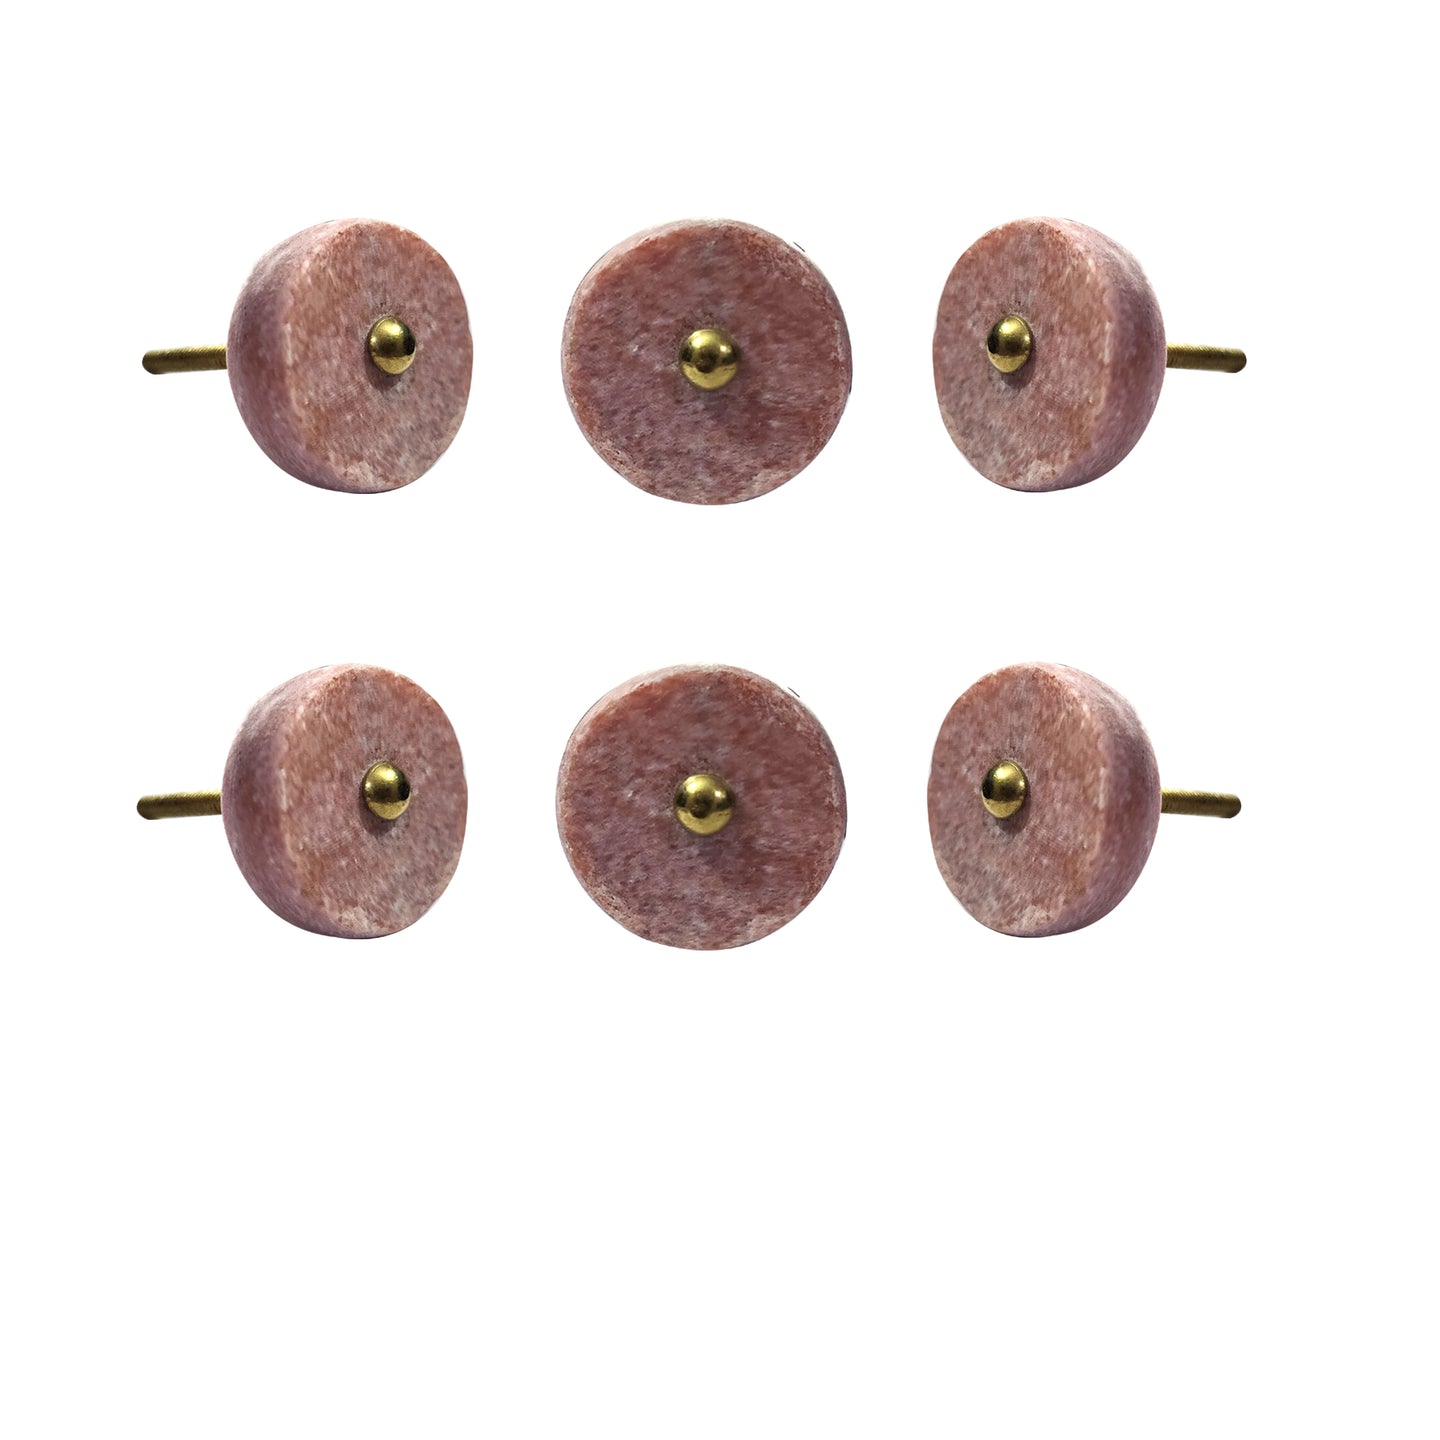 Tyre Pink Stone Knobs set of 6